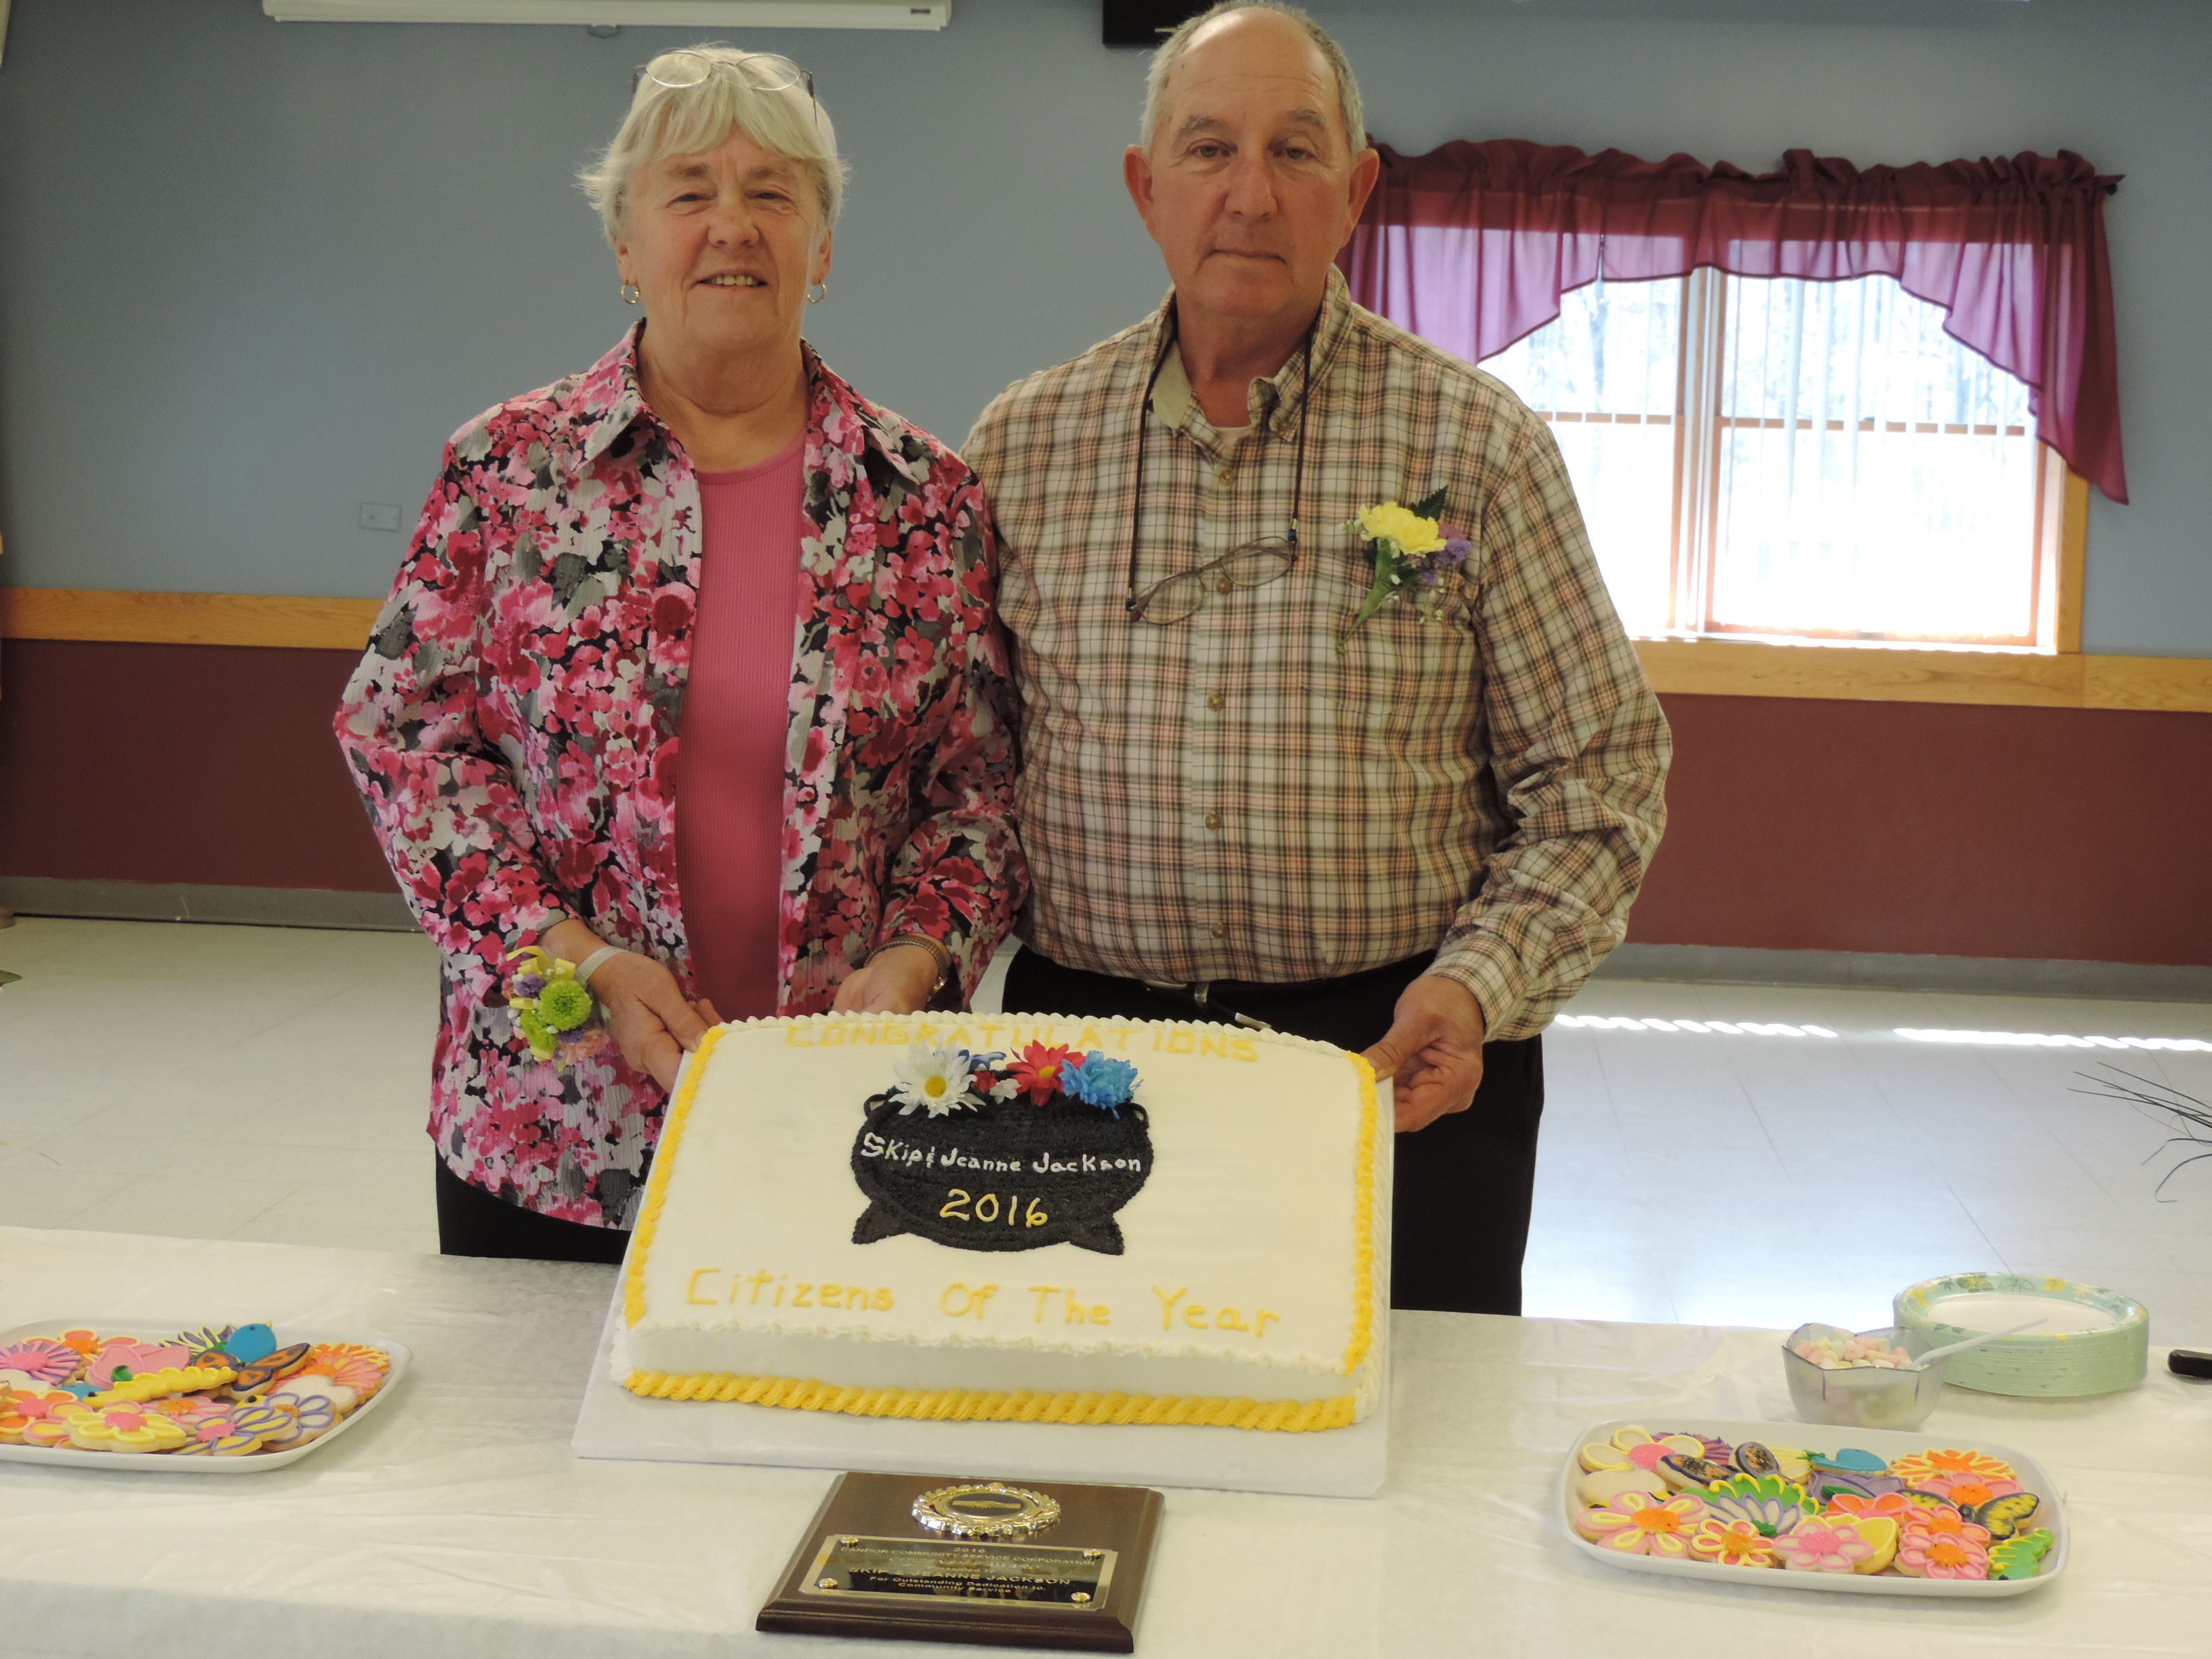 Skip and Jeanne Jackson honored as ‘Candor Citizens of the Year’